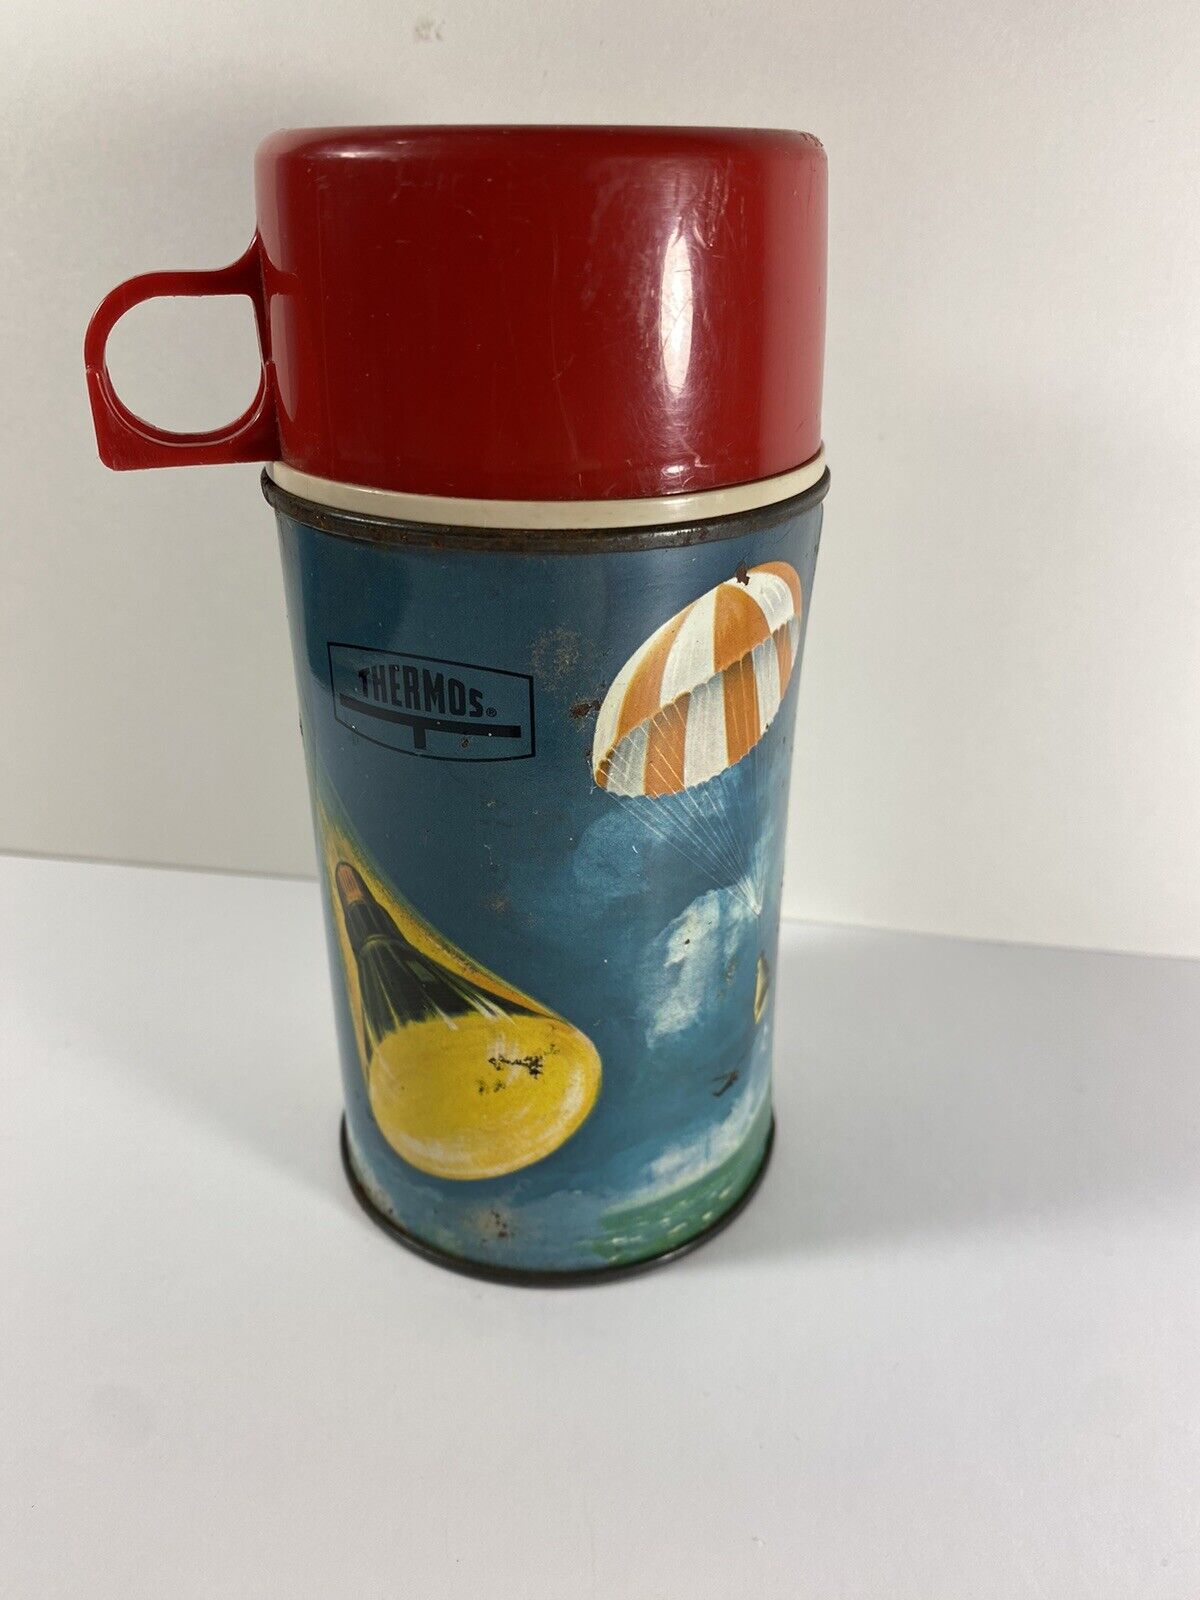 Vintage Space 1963 Lunchbox Thermos Astronaut King Seeley No. 2856 Read